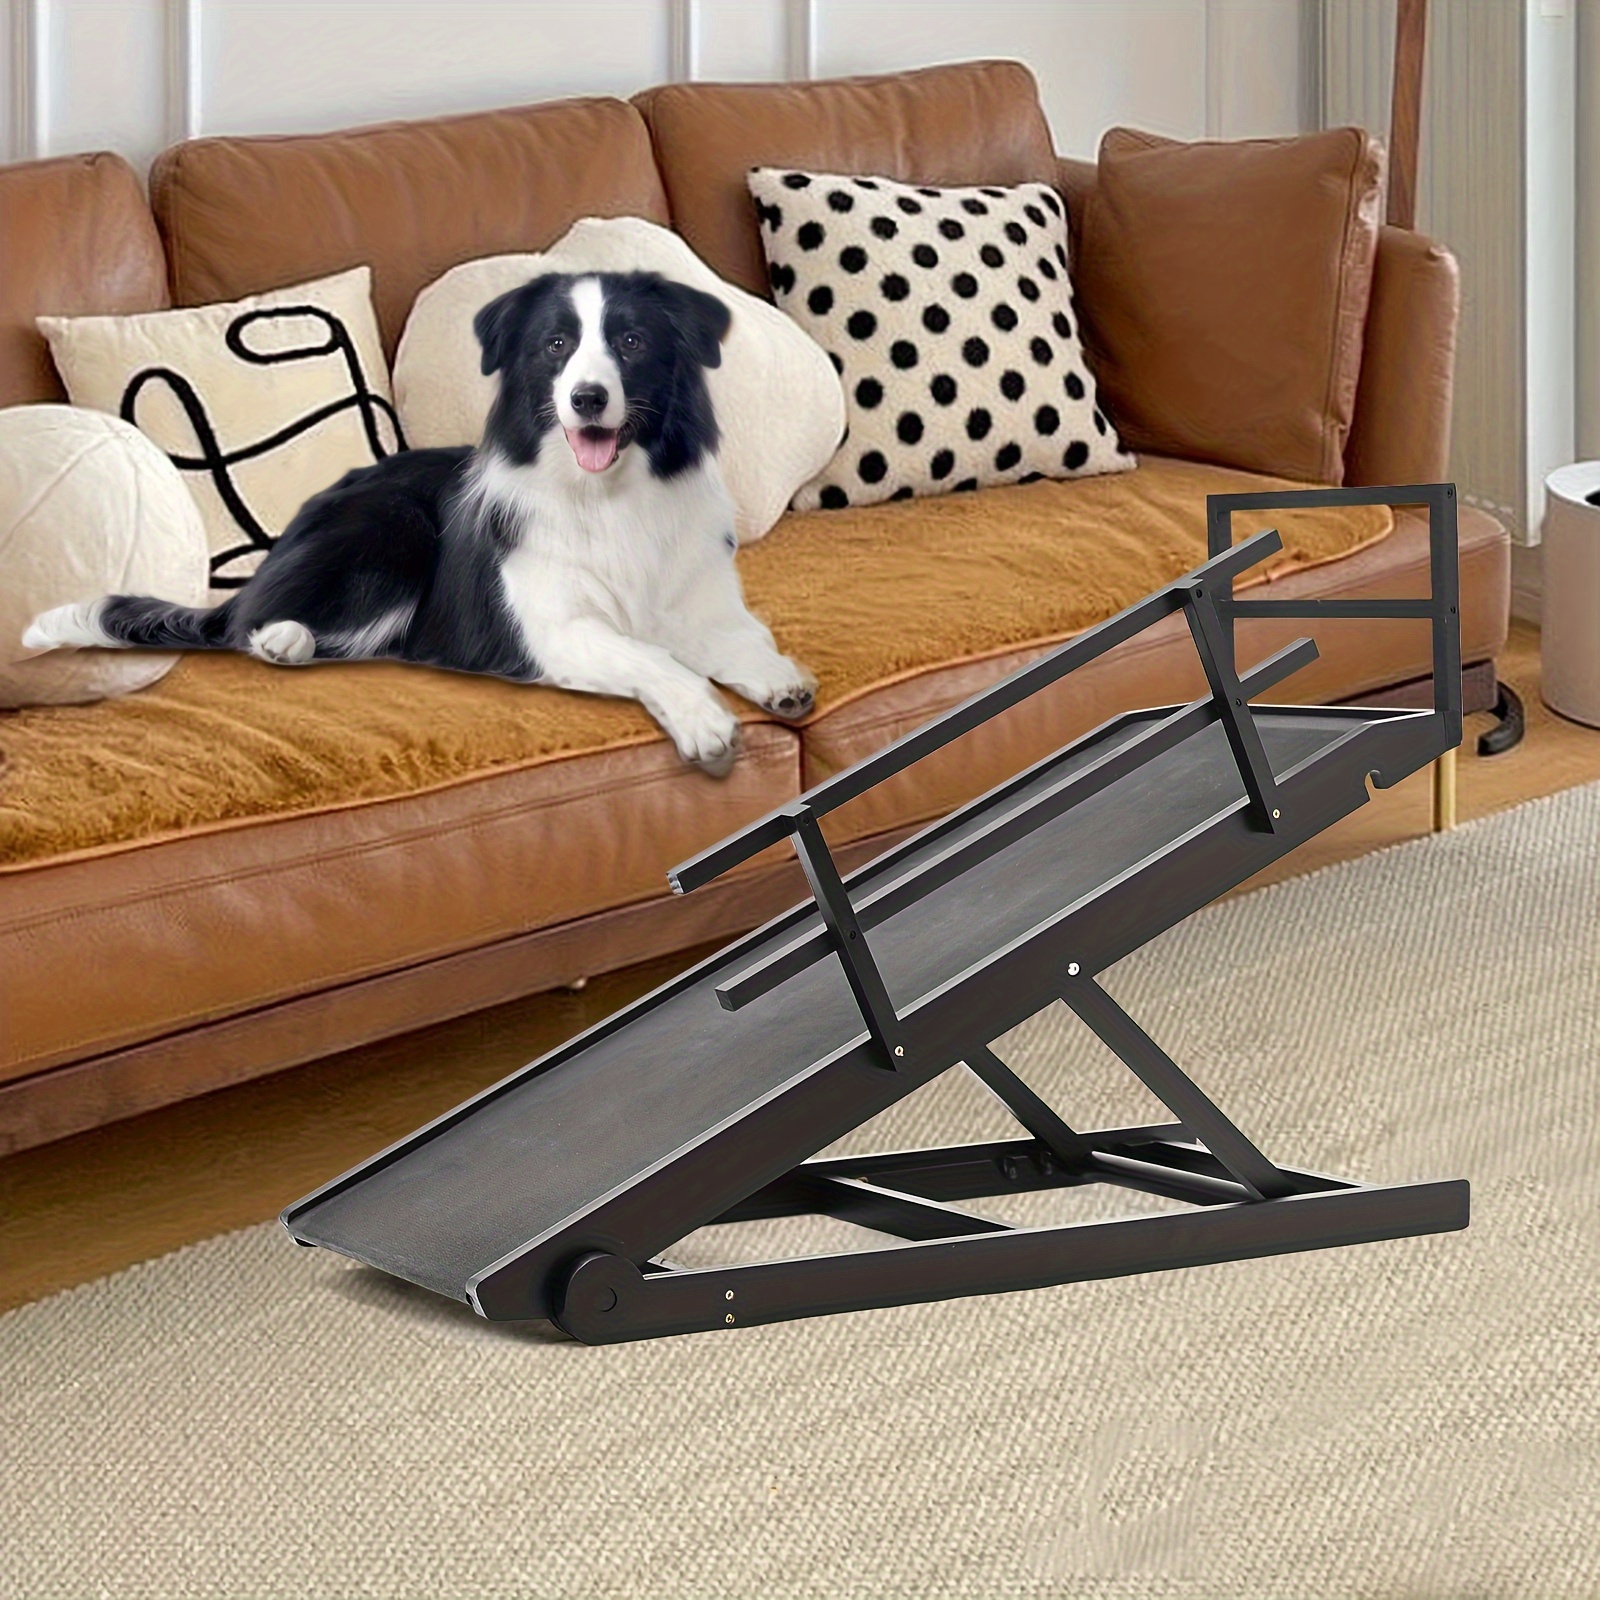 

Lilypelle Dog Ramp, Pet Climbing Ladder, 5 Level Adjustable Folding Pet Ramp, High Traction Portable Paw Ramps For Bed, Couch, Suv, Upload To 200 Lbs, 45.2" Long, Black